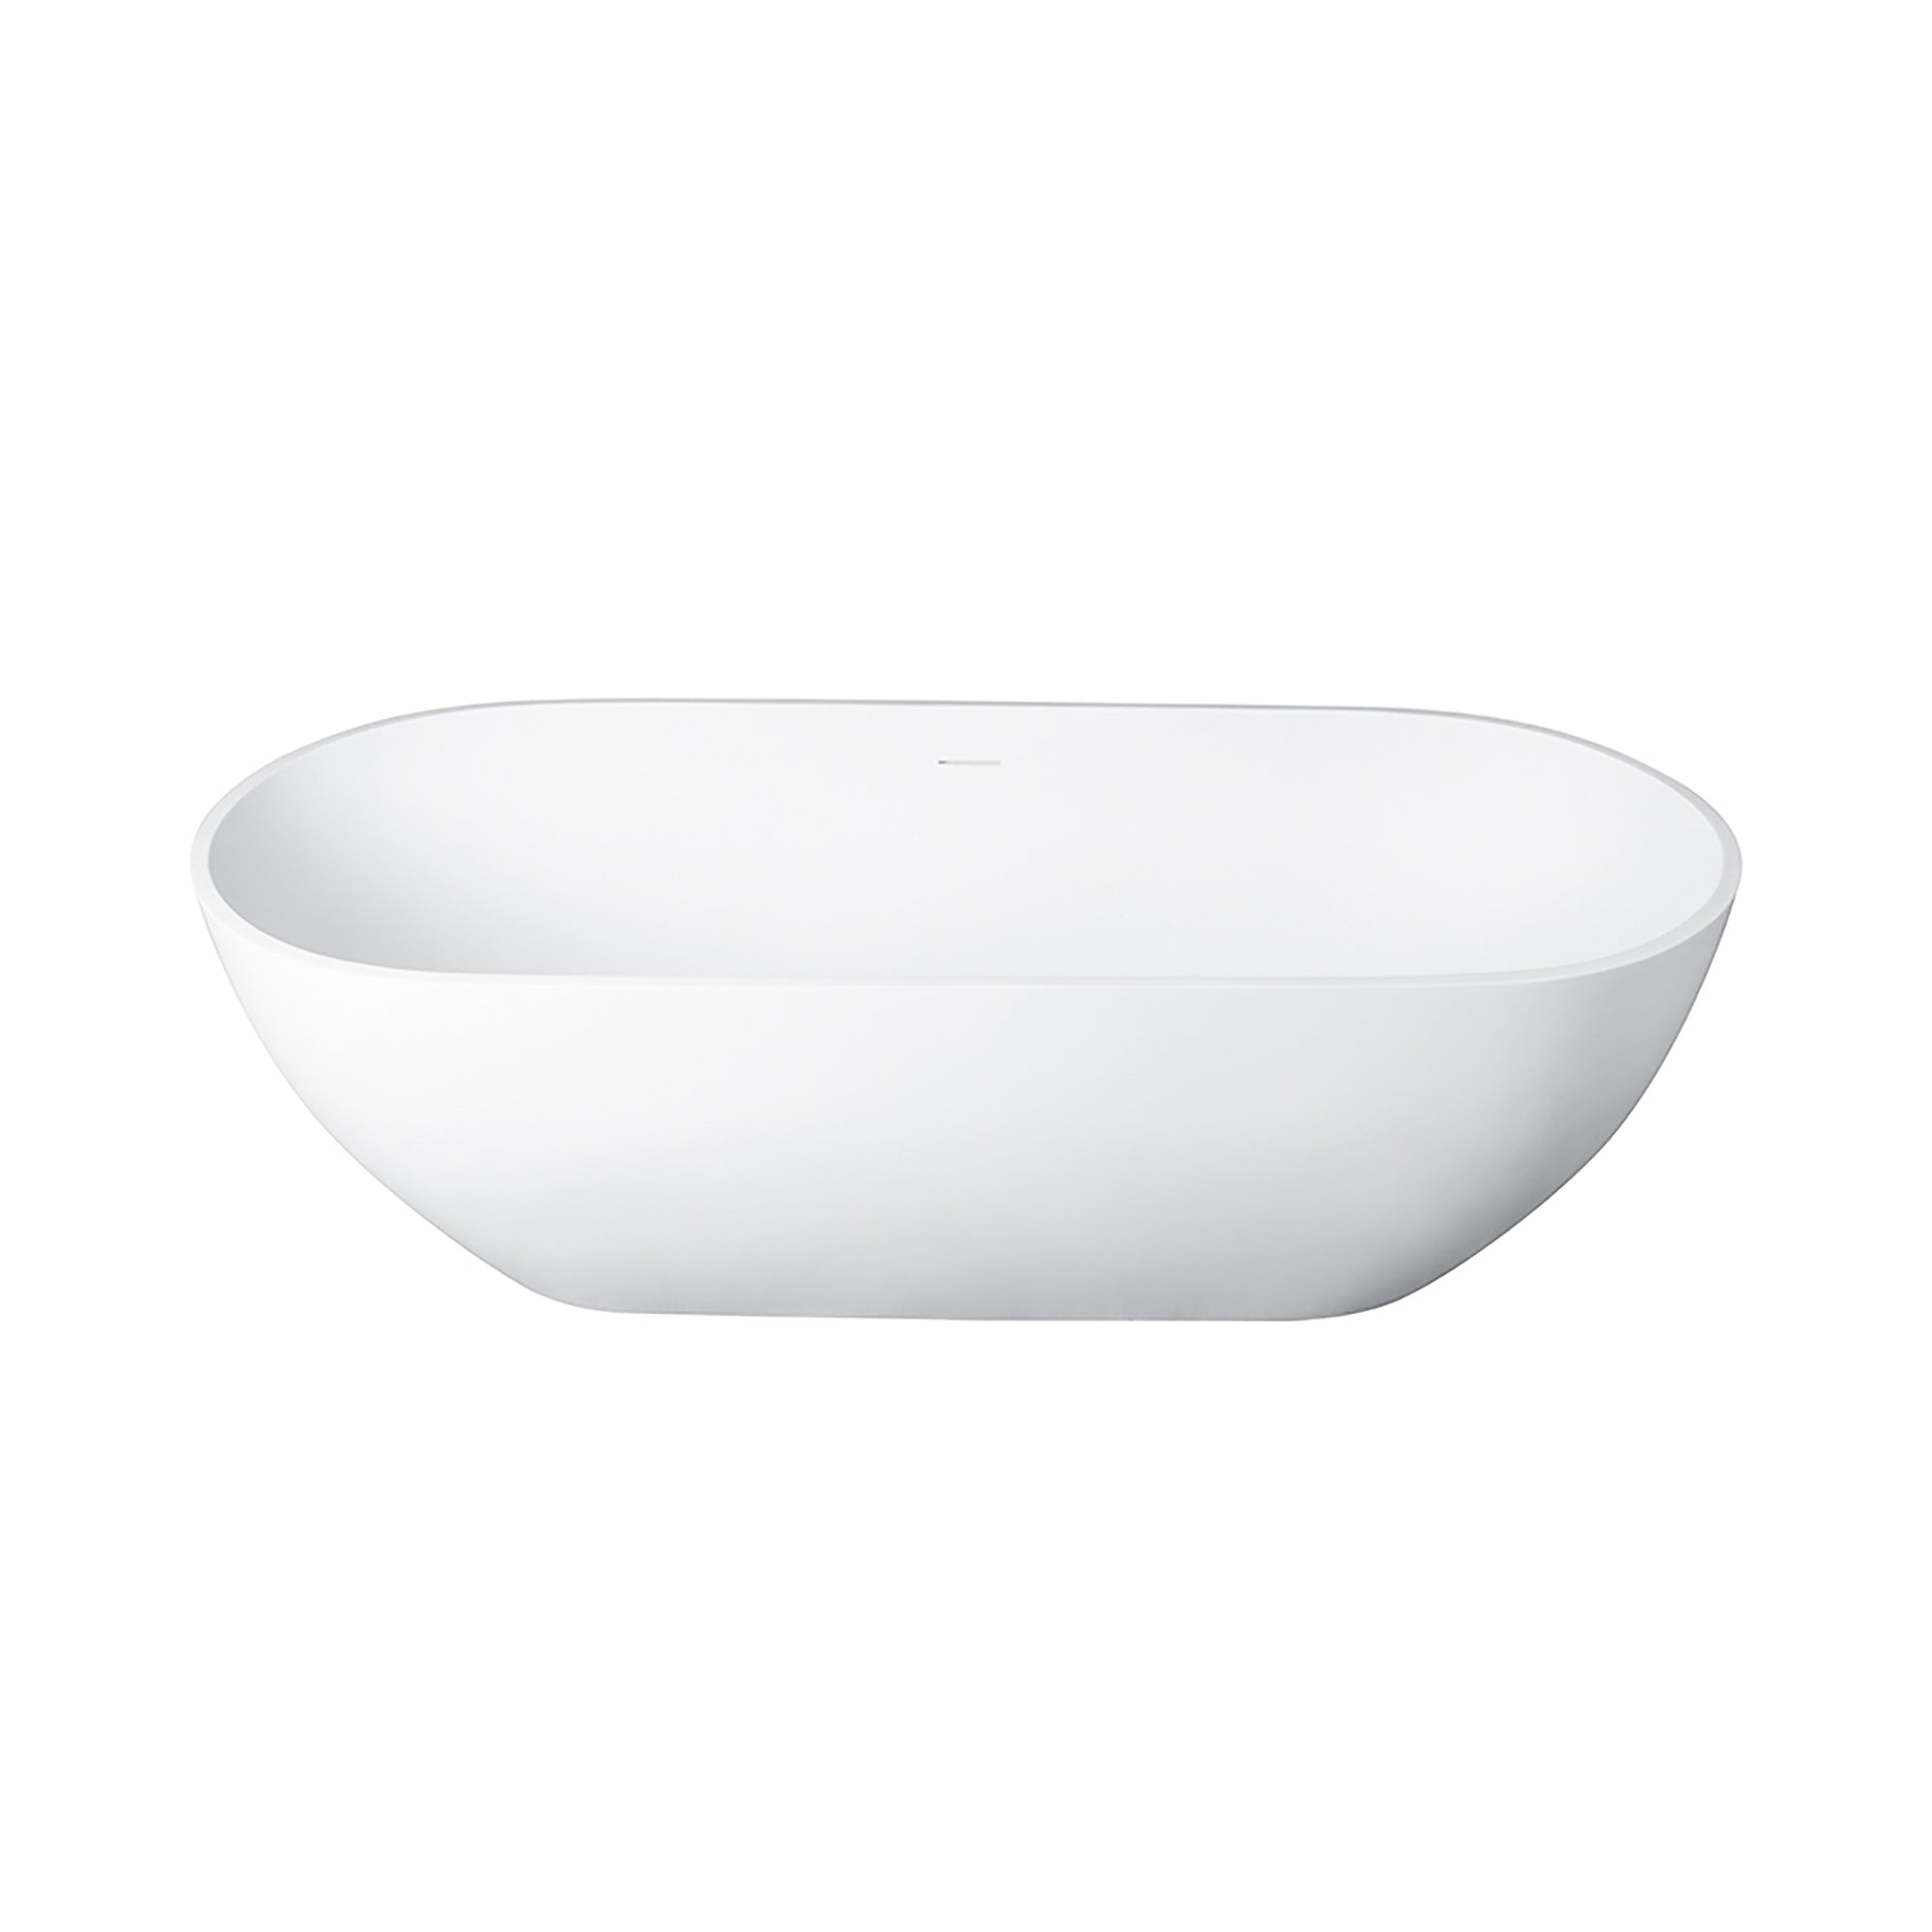 69" Oval Freestanding Solid Surface Soaking Bathtub with Overflow RX-S05-69